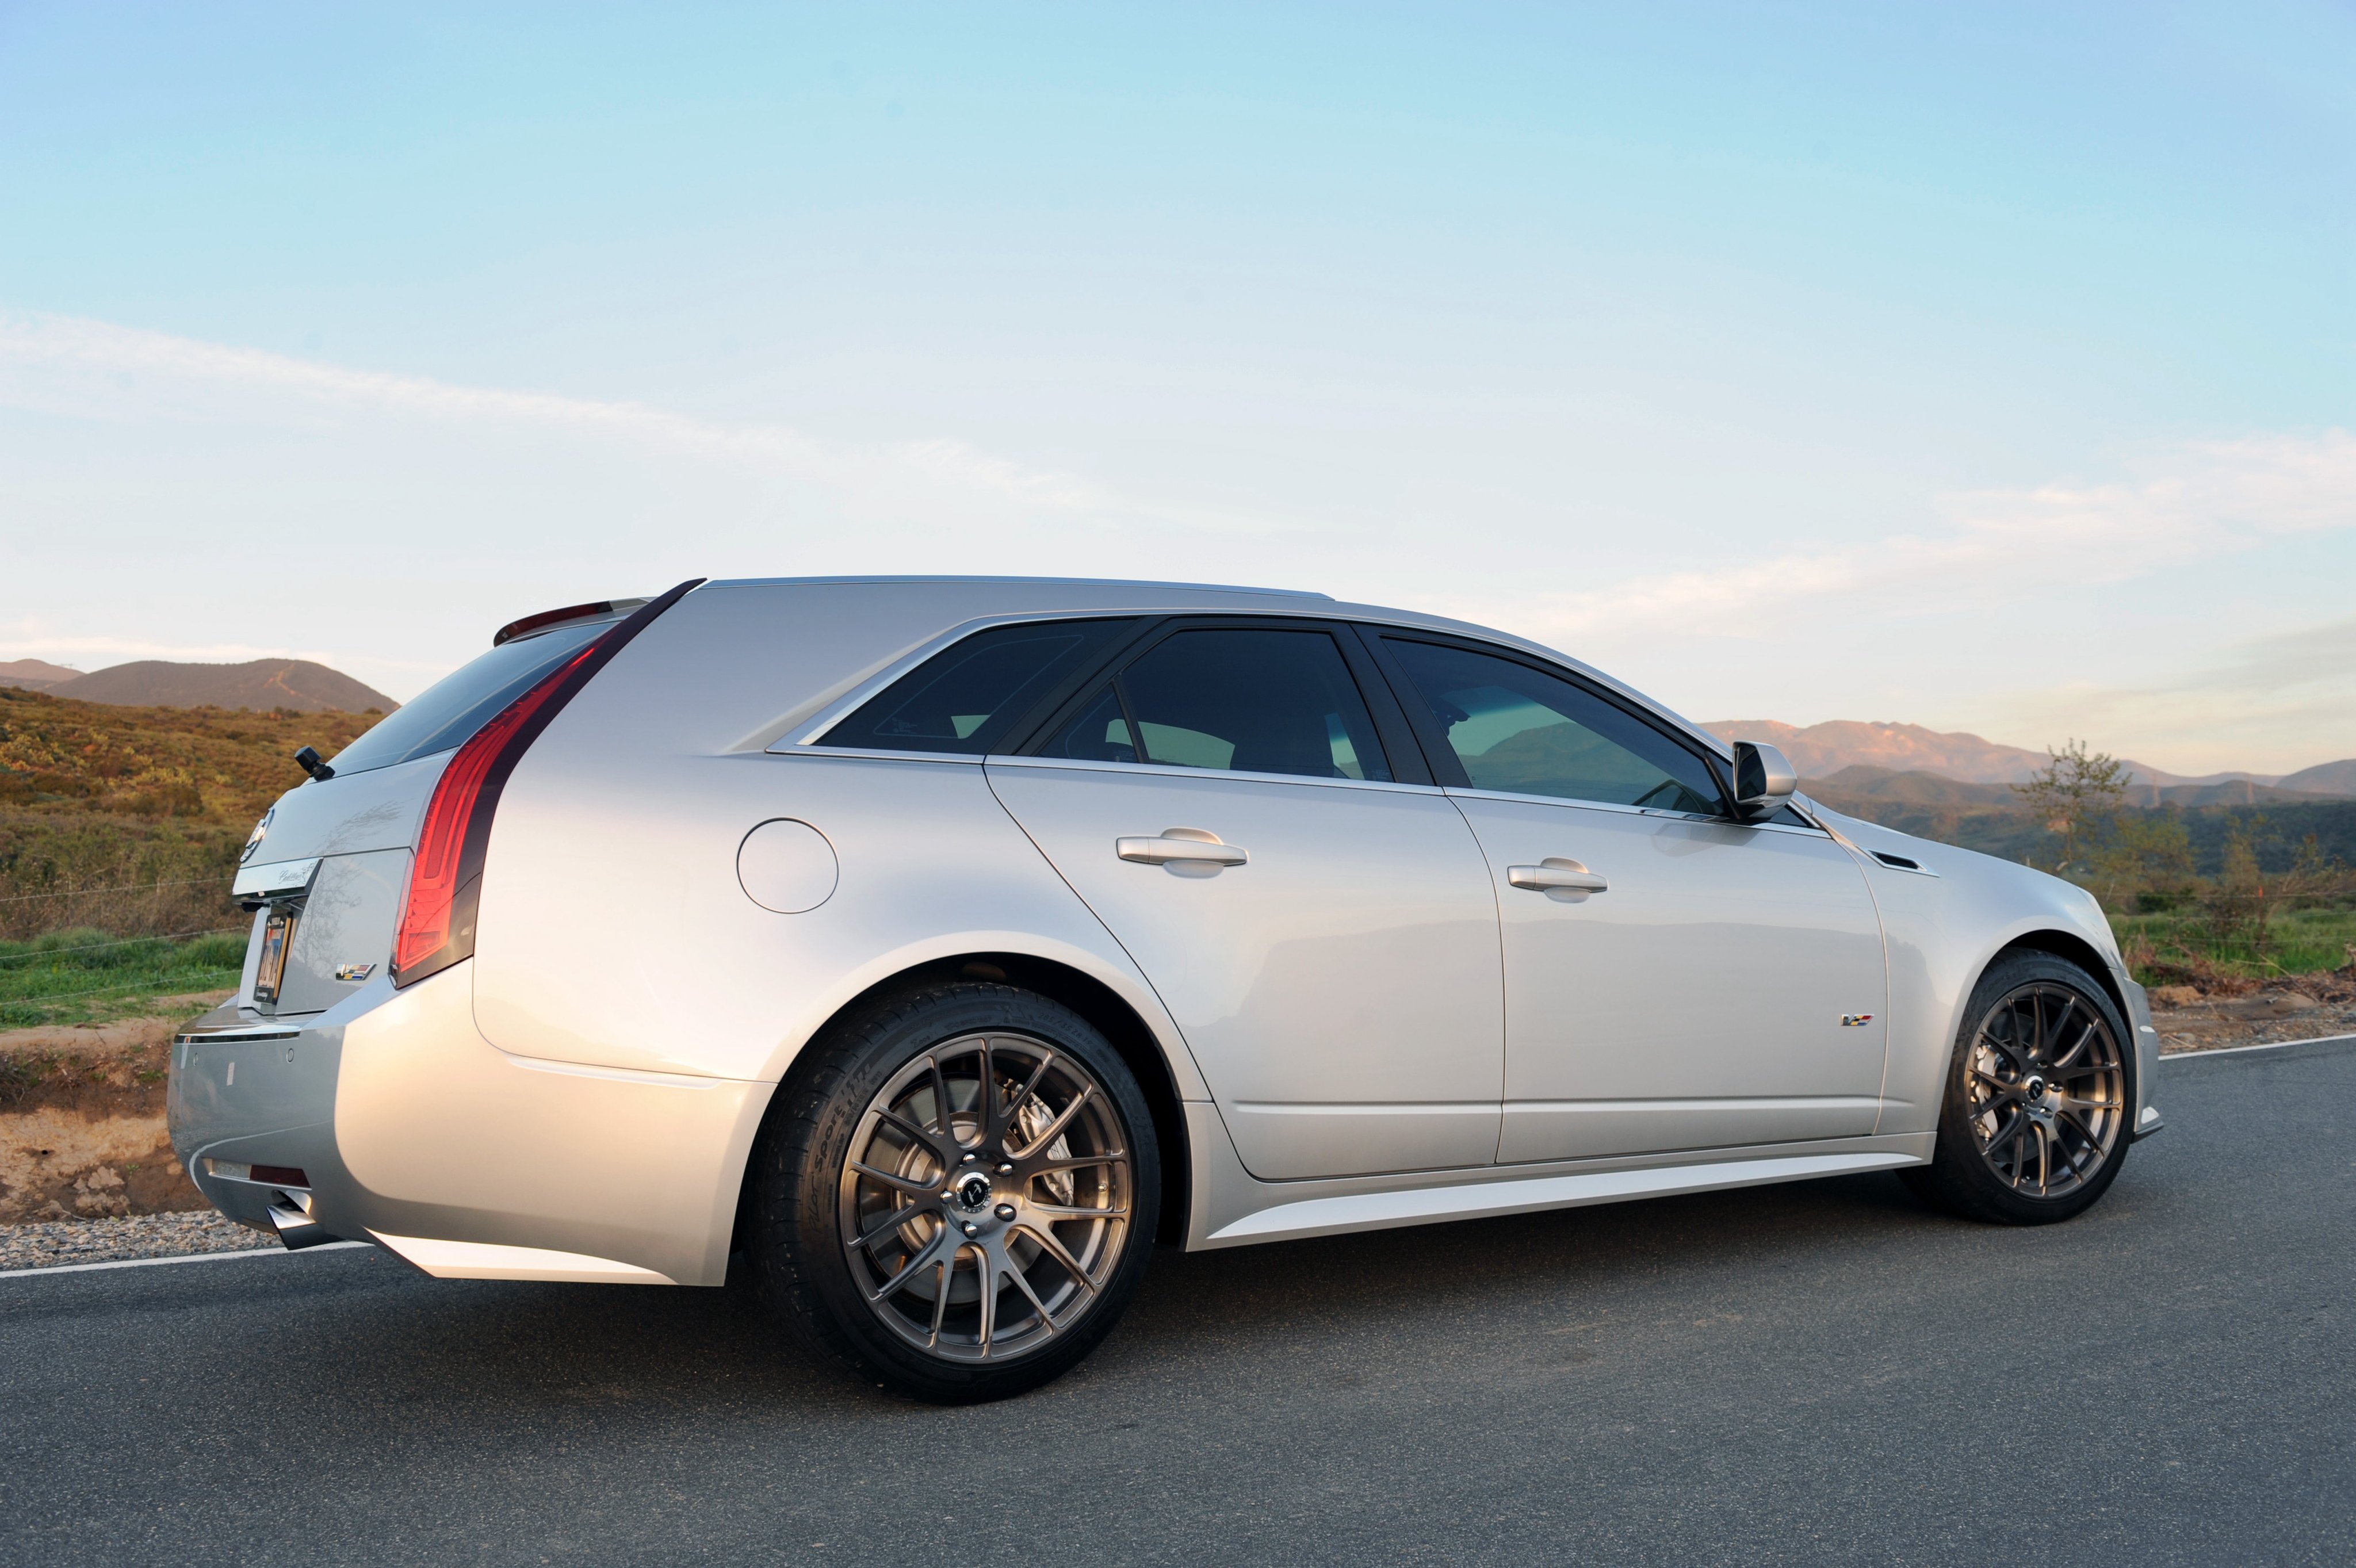 2012, Hennessey, Cadillac, Cts v, V650, Stationwagon, Muscle, Cts Wallpaper